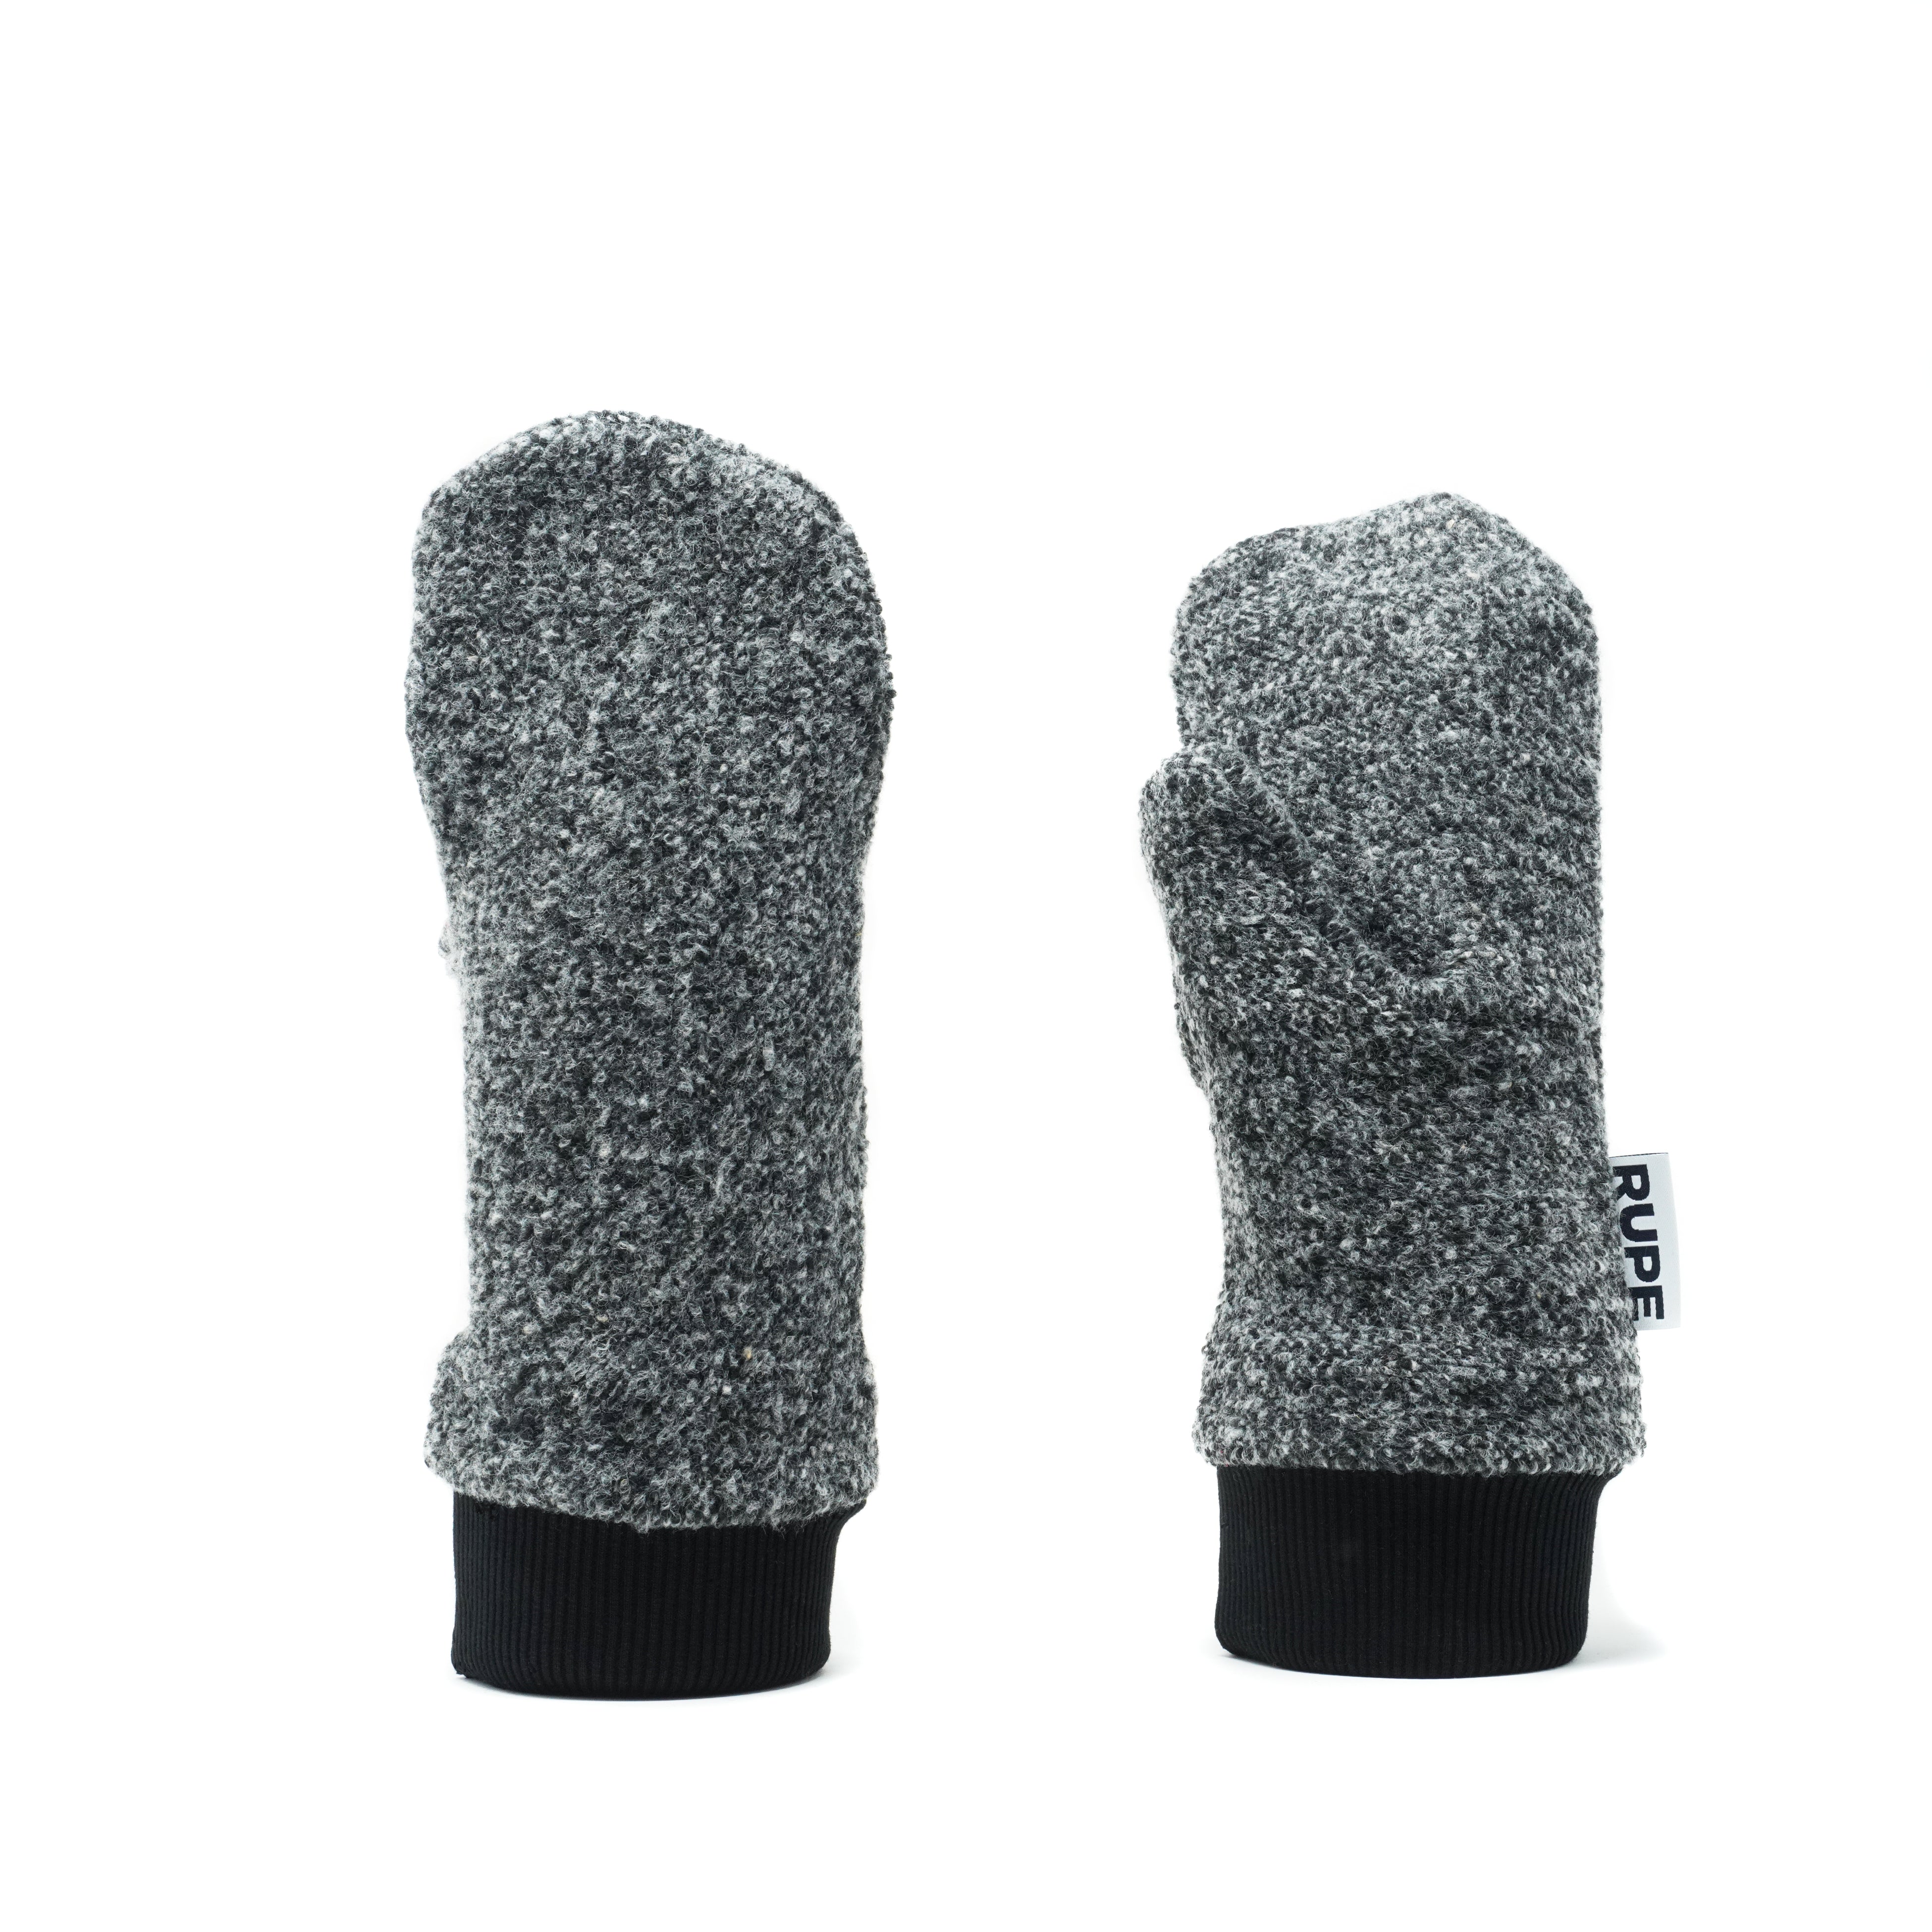 MITTENS - LIMITED EDITION - Gray Melange